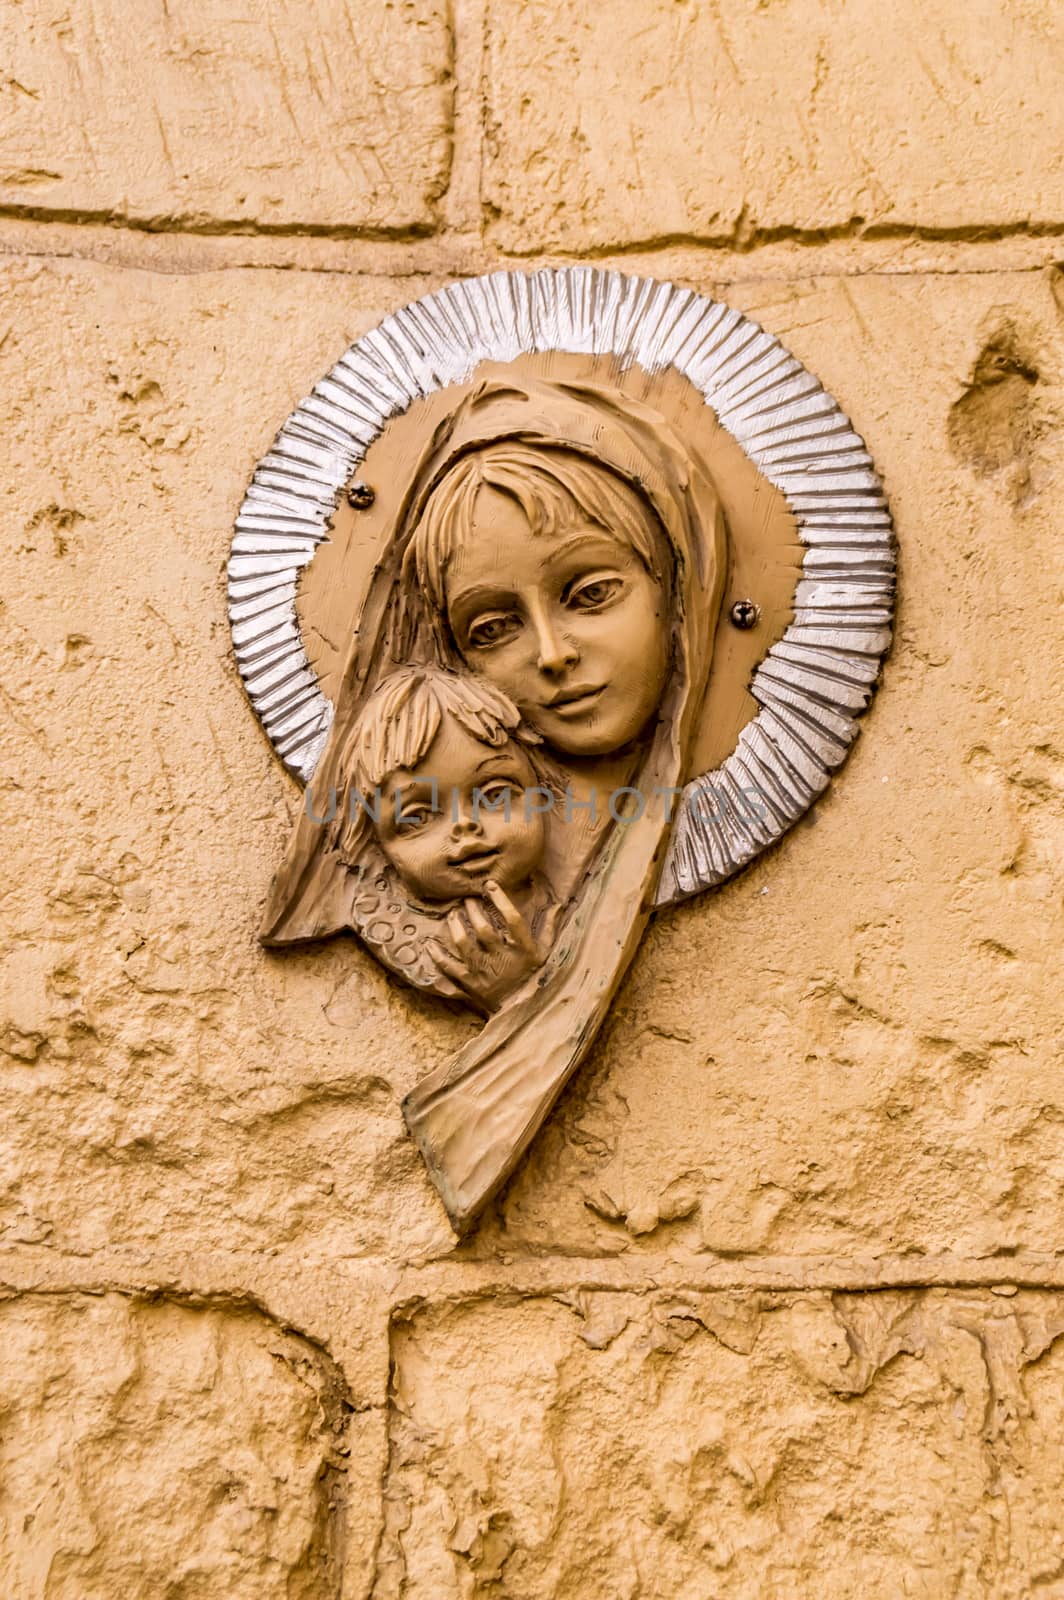 Virgin Mary icon. Religious icon on stone wall of Virgin Mary and the holy child Jesus